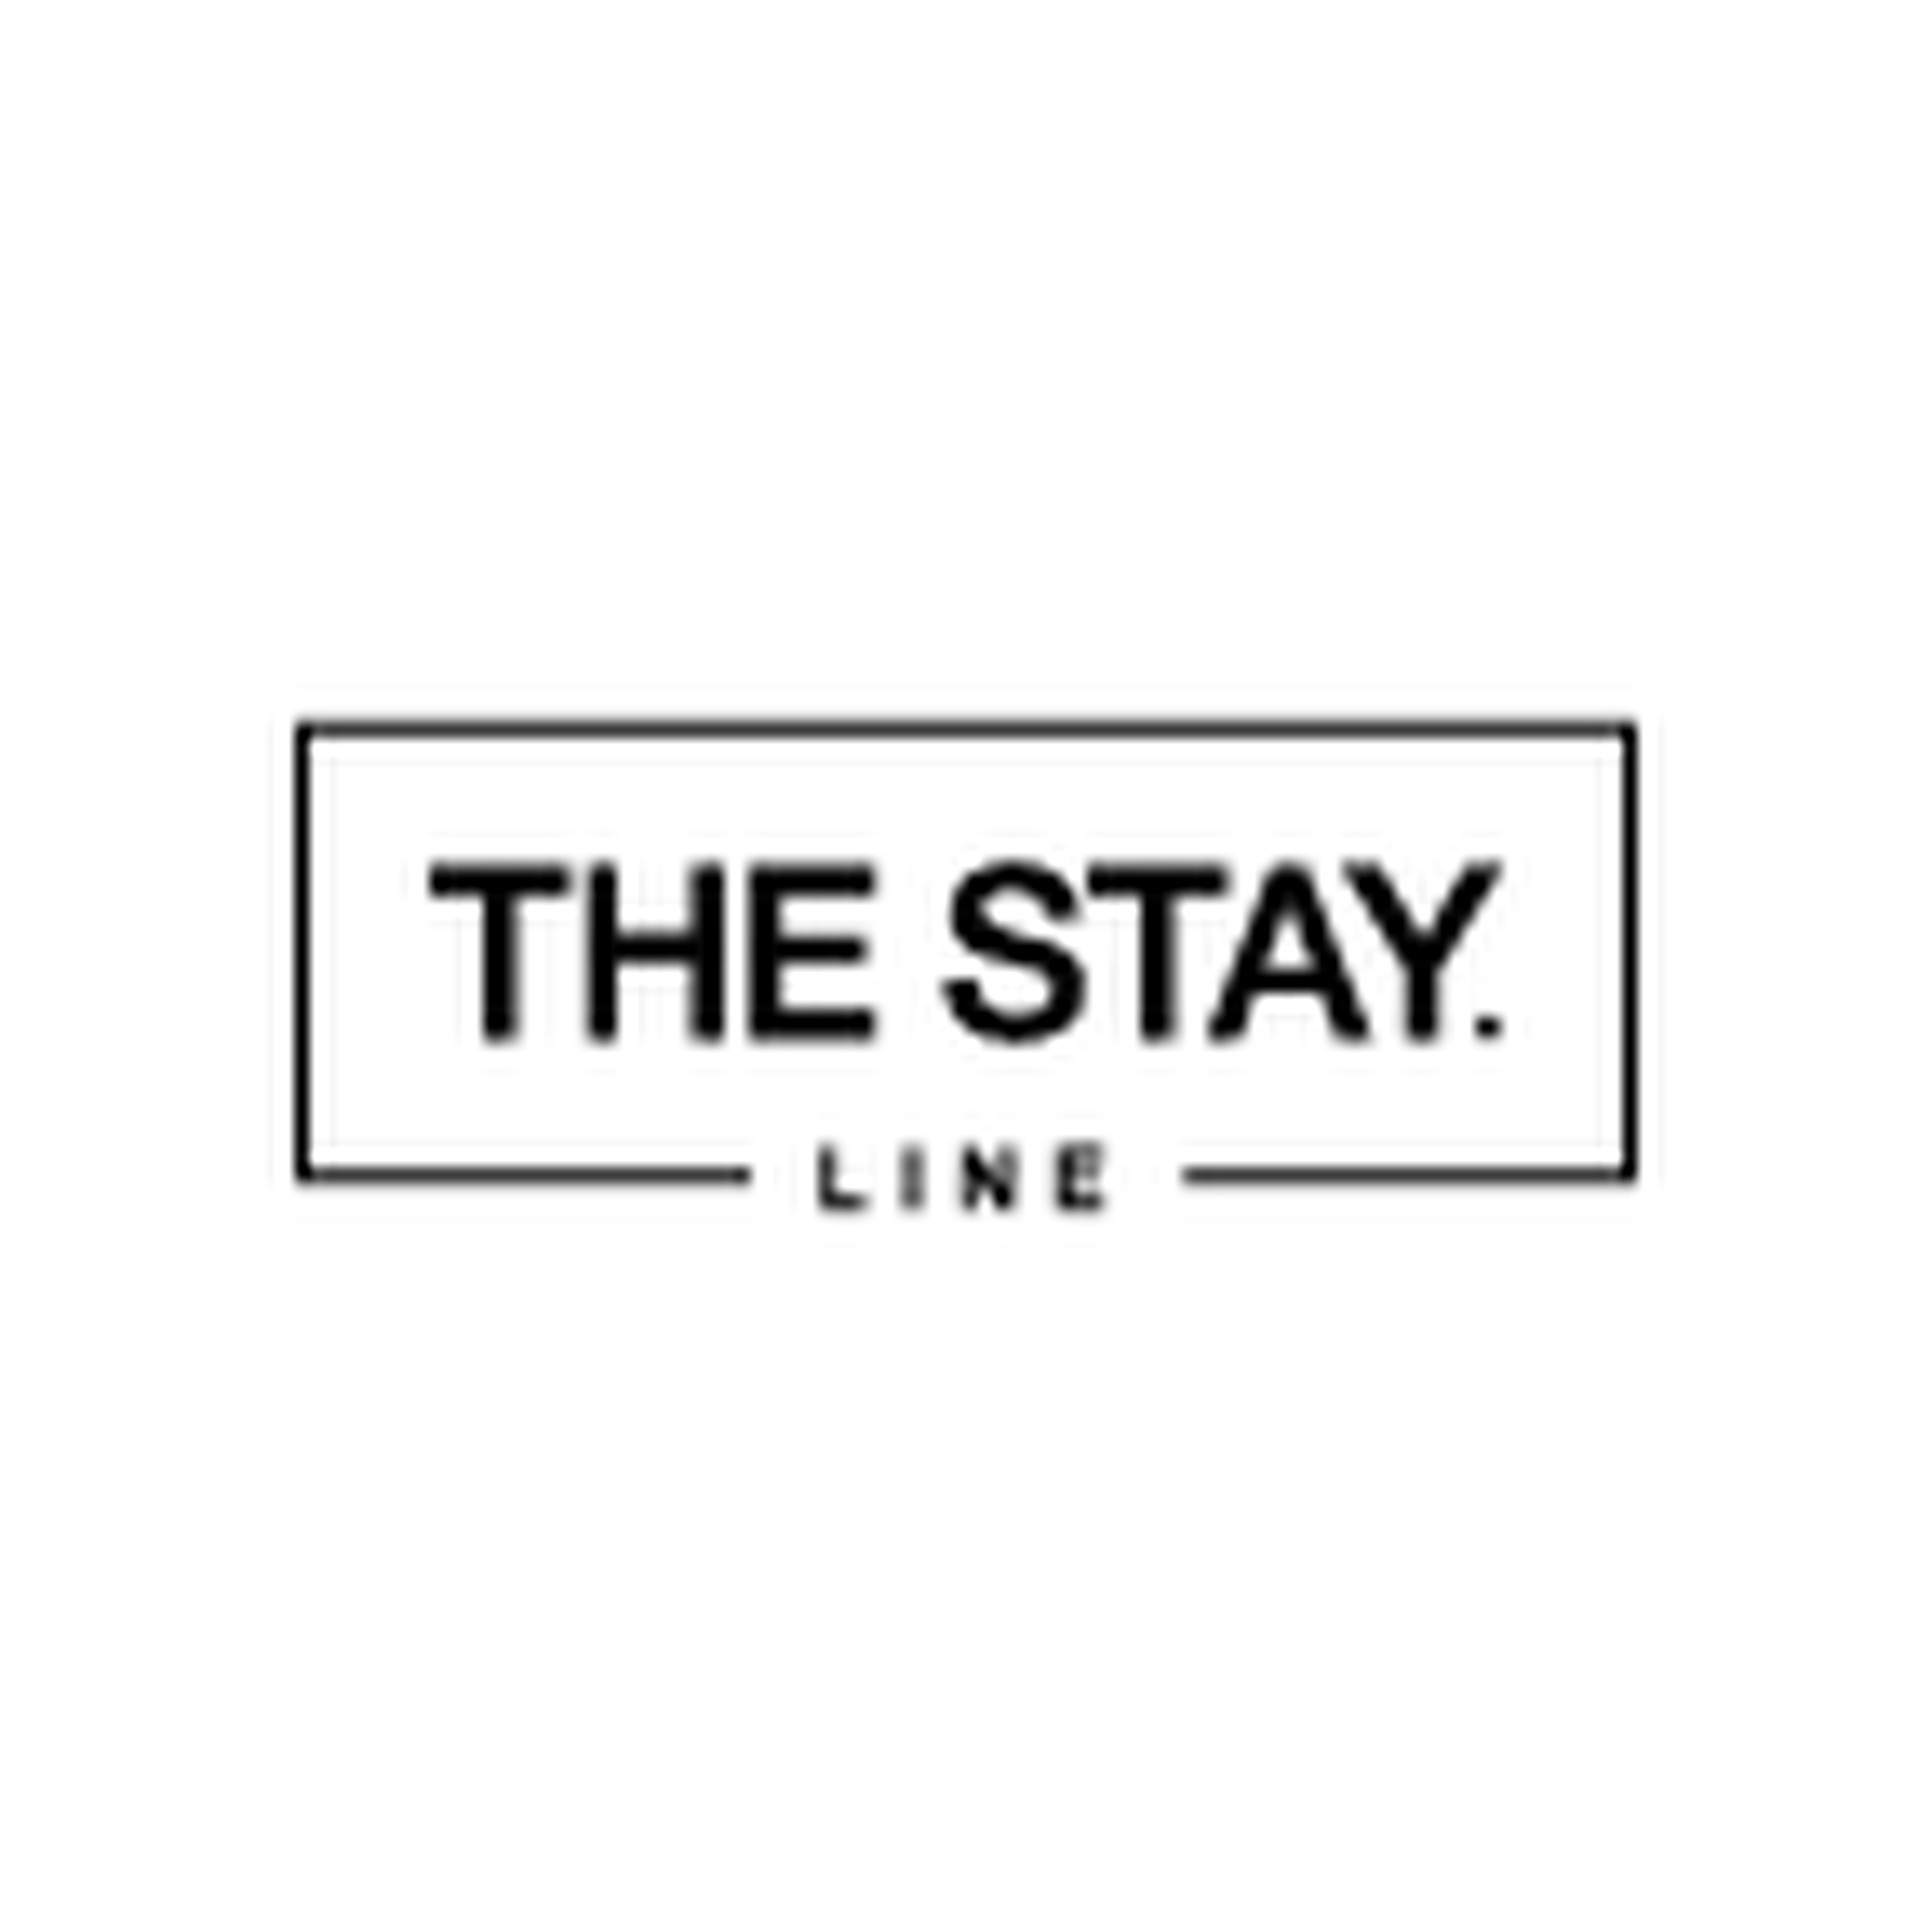 The Stay Line